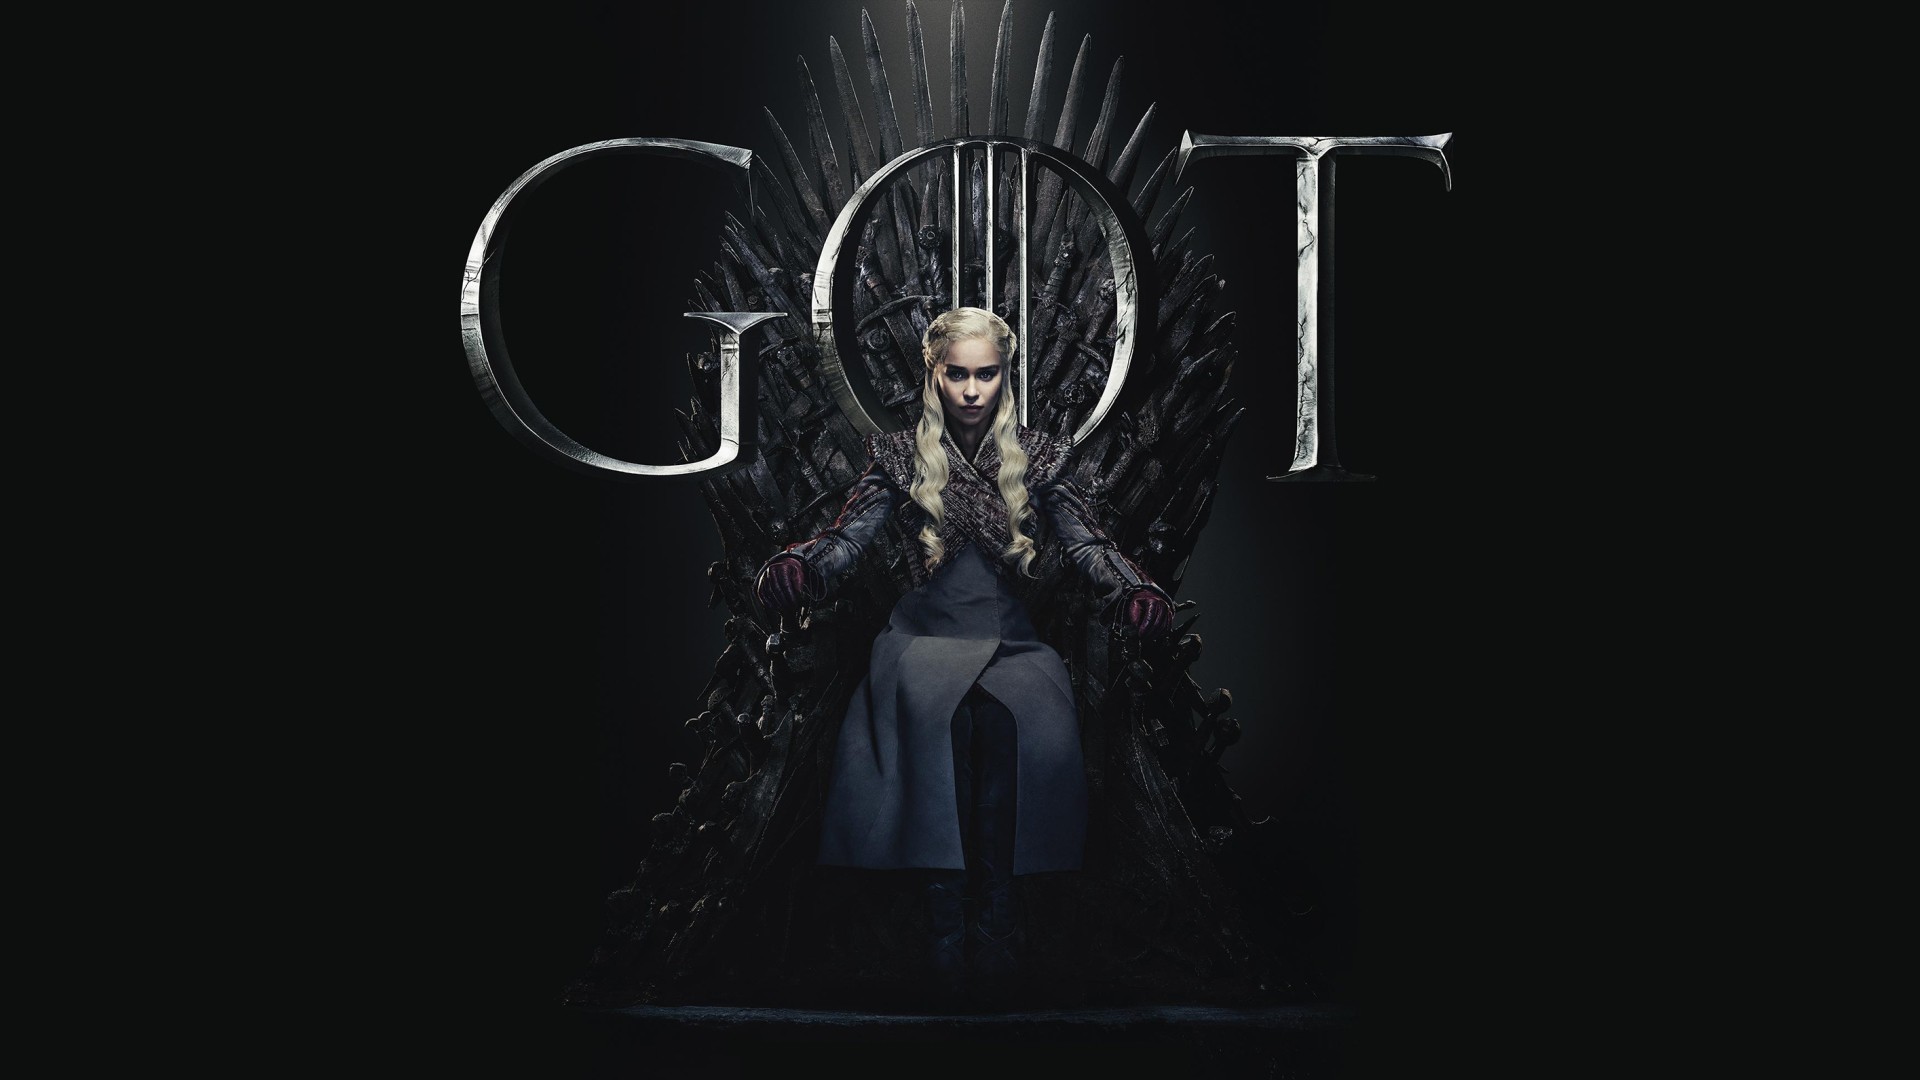 Game of Thrones 8 Season Wallpaper HD With high-resolution 1920X1080 pixel. You can use this wallpaper for your Desktop Computer Backgrounds, Mac Wallpapers, Android Lock screen or iPhone Screensavers and another smartphone device